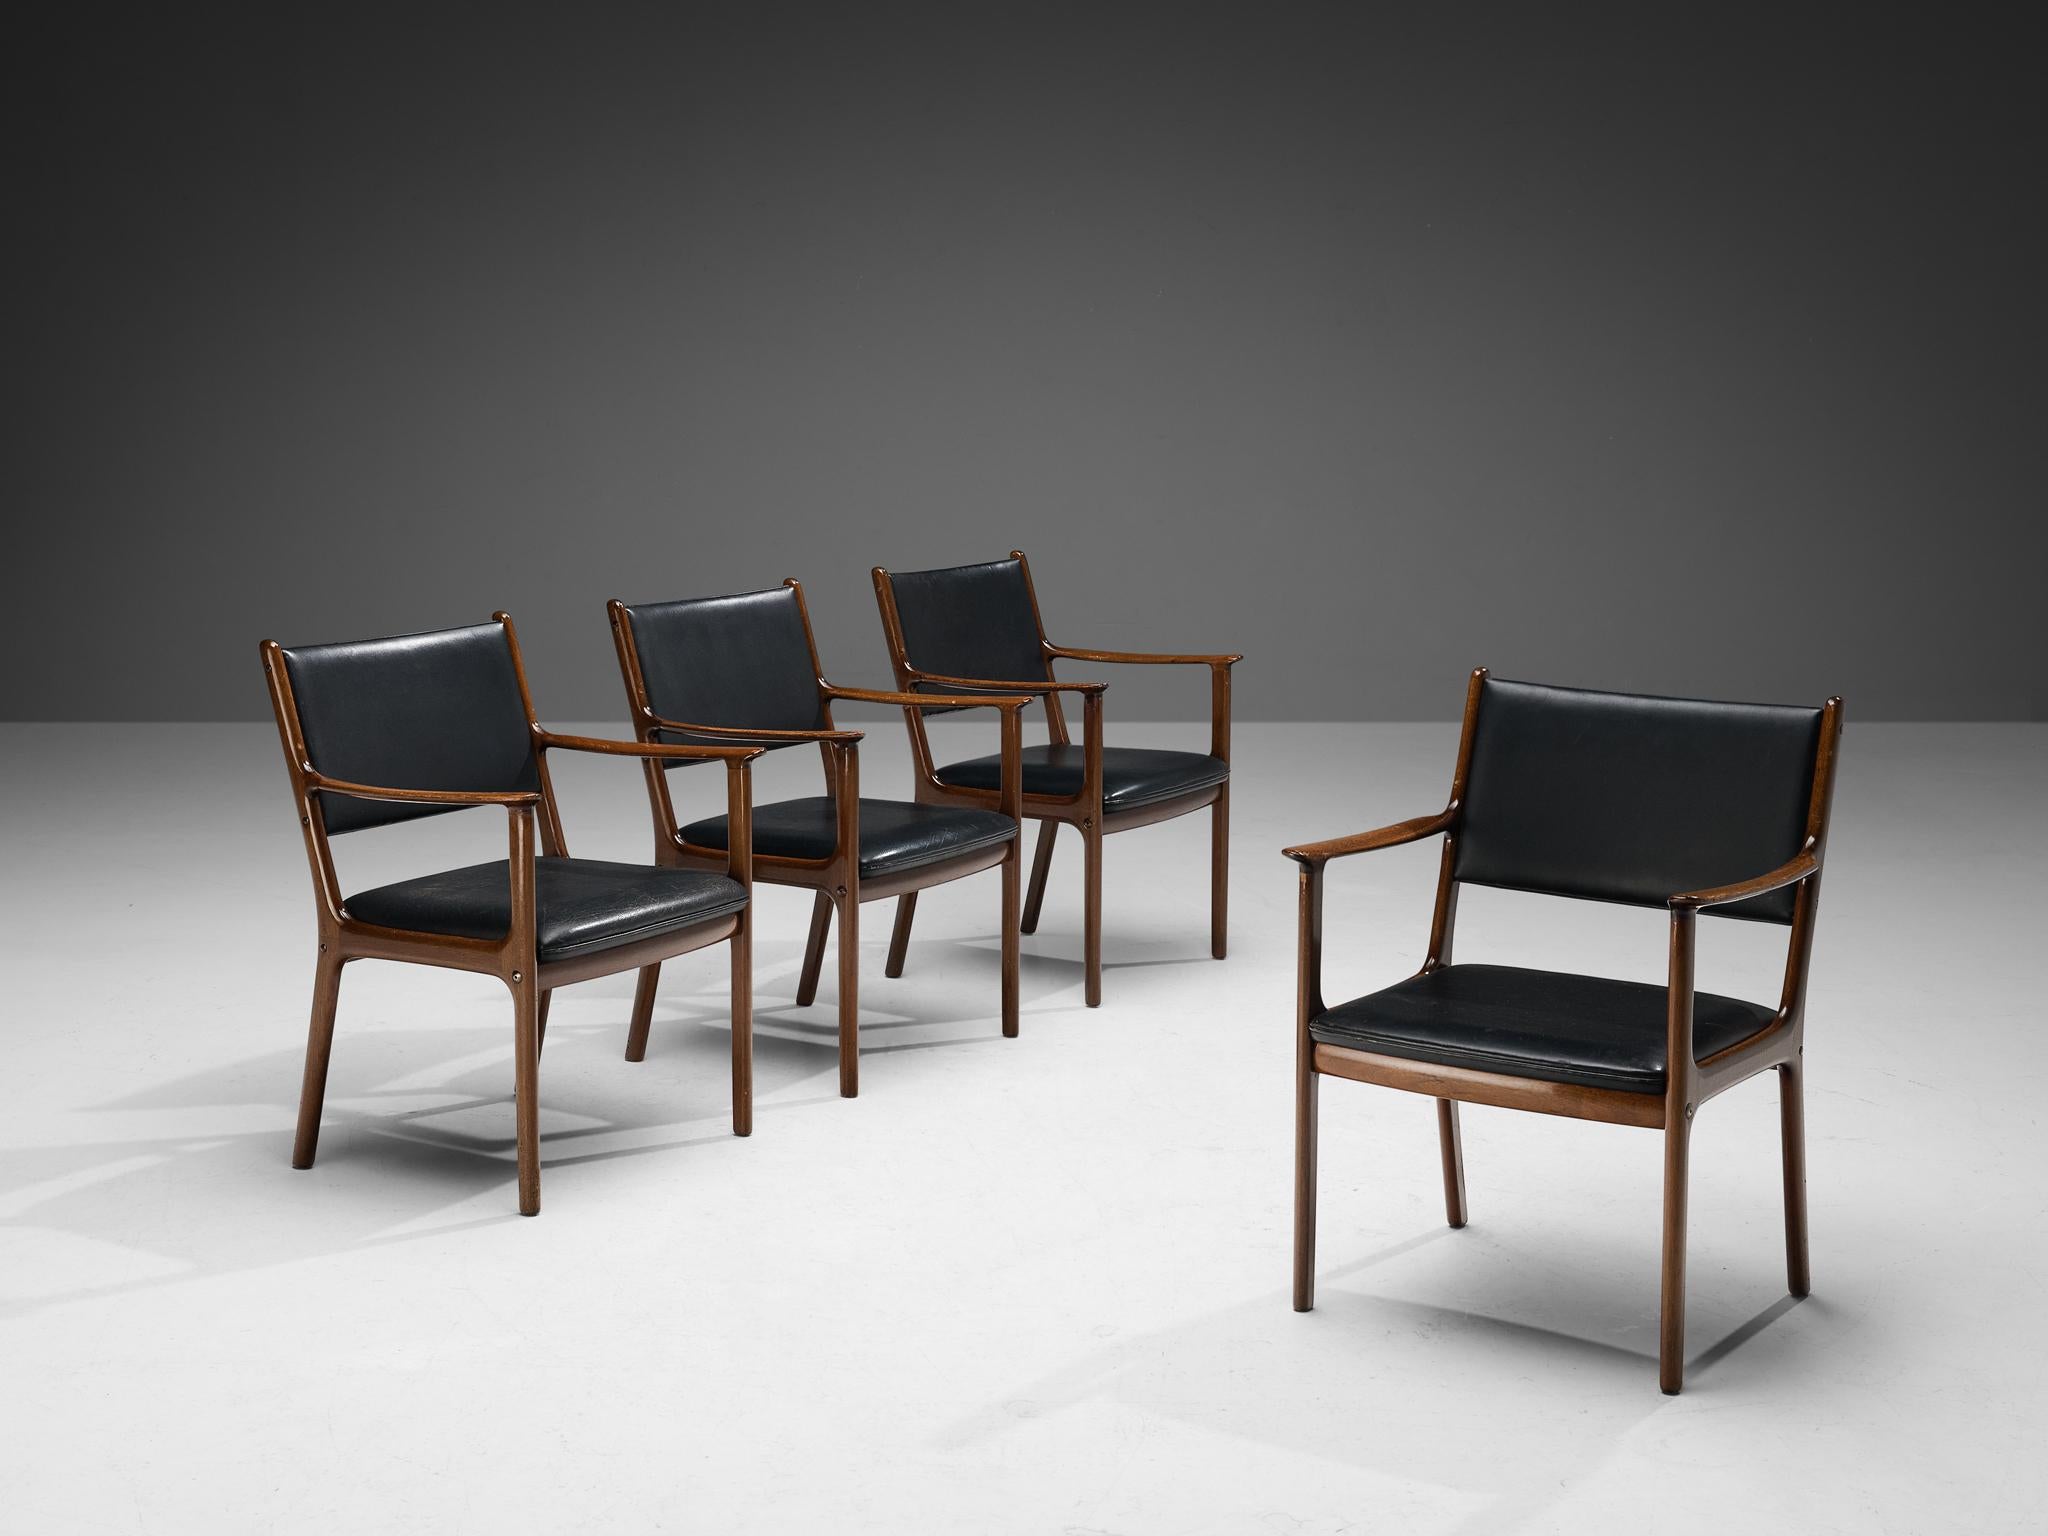 Ole Wanscher for P. Jeppesen Møbelfabrik, set of four armchairs, model 'PJ412', teak, leather, Denmark, 1960s 

Modest set of dining chairs designed by Ole Wanscher in the 1960s. These chairs are very comfortable thanks to the remarkable wide seats